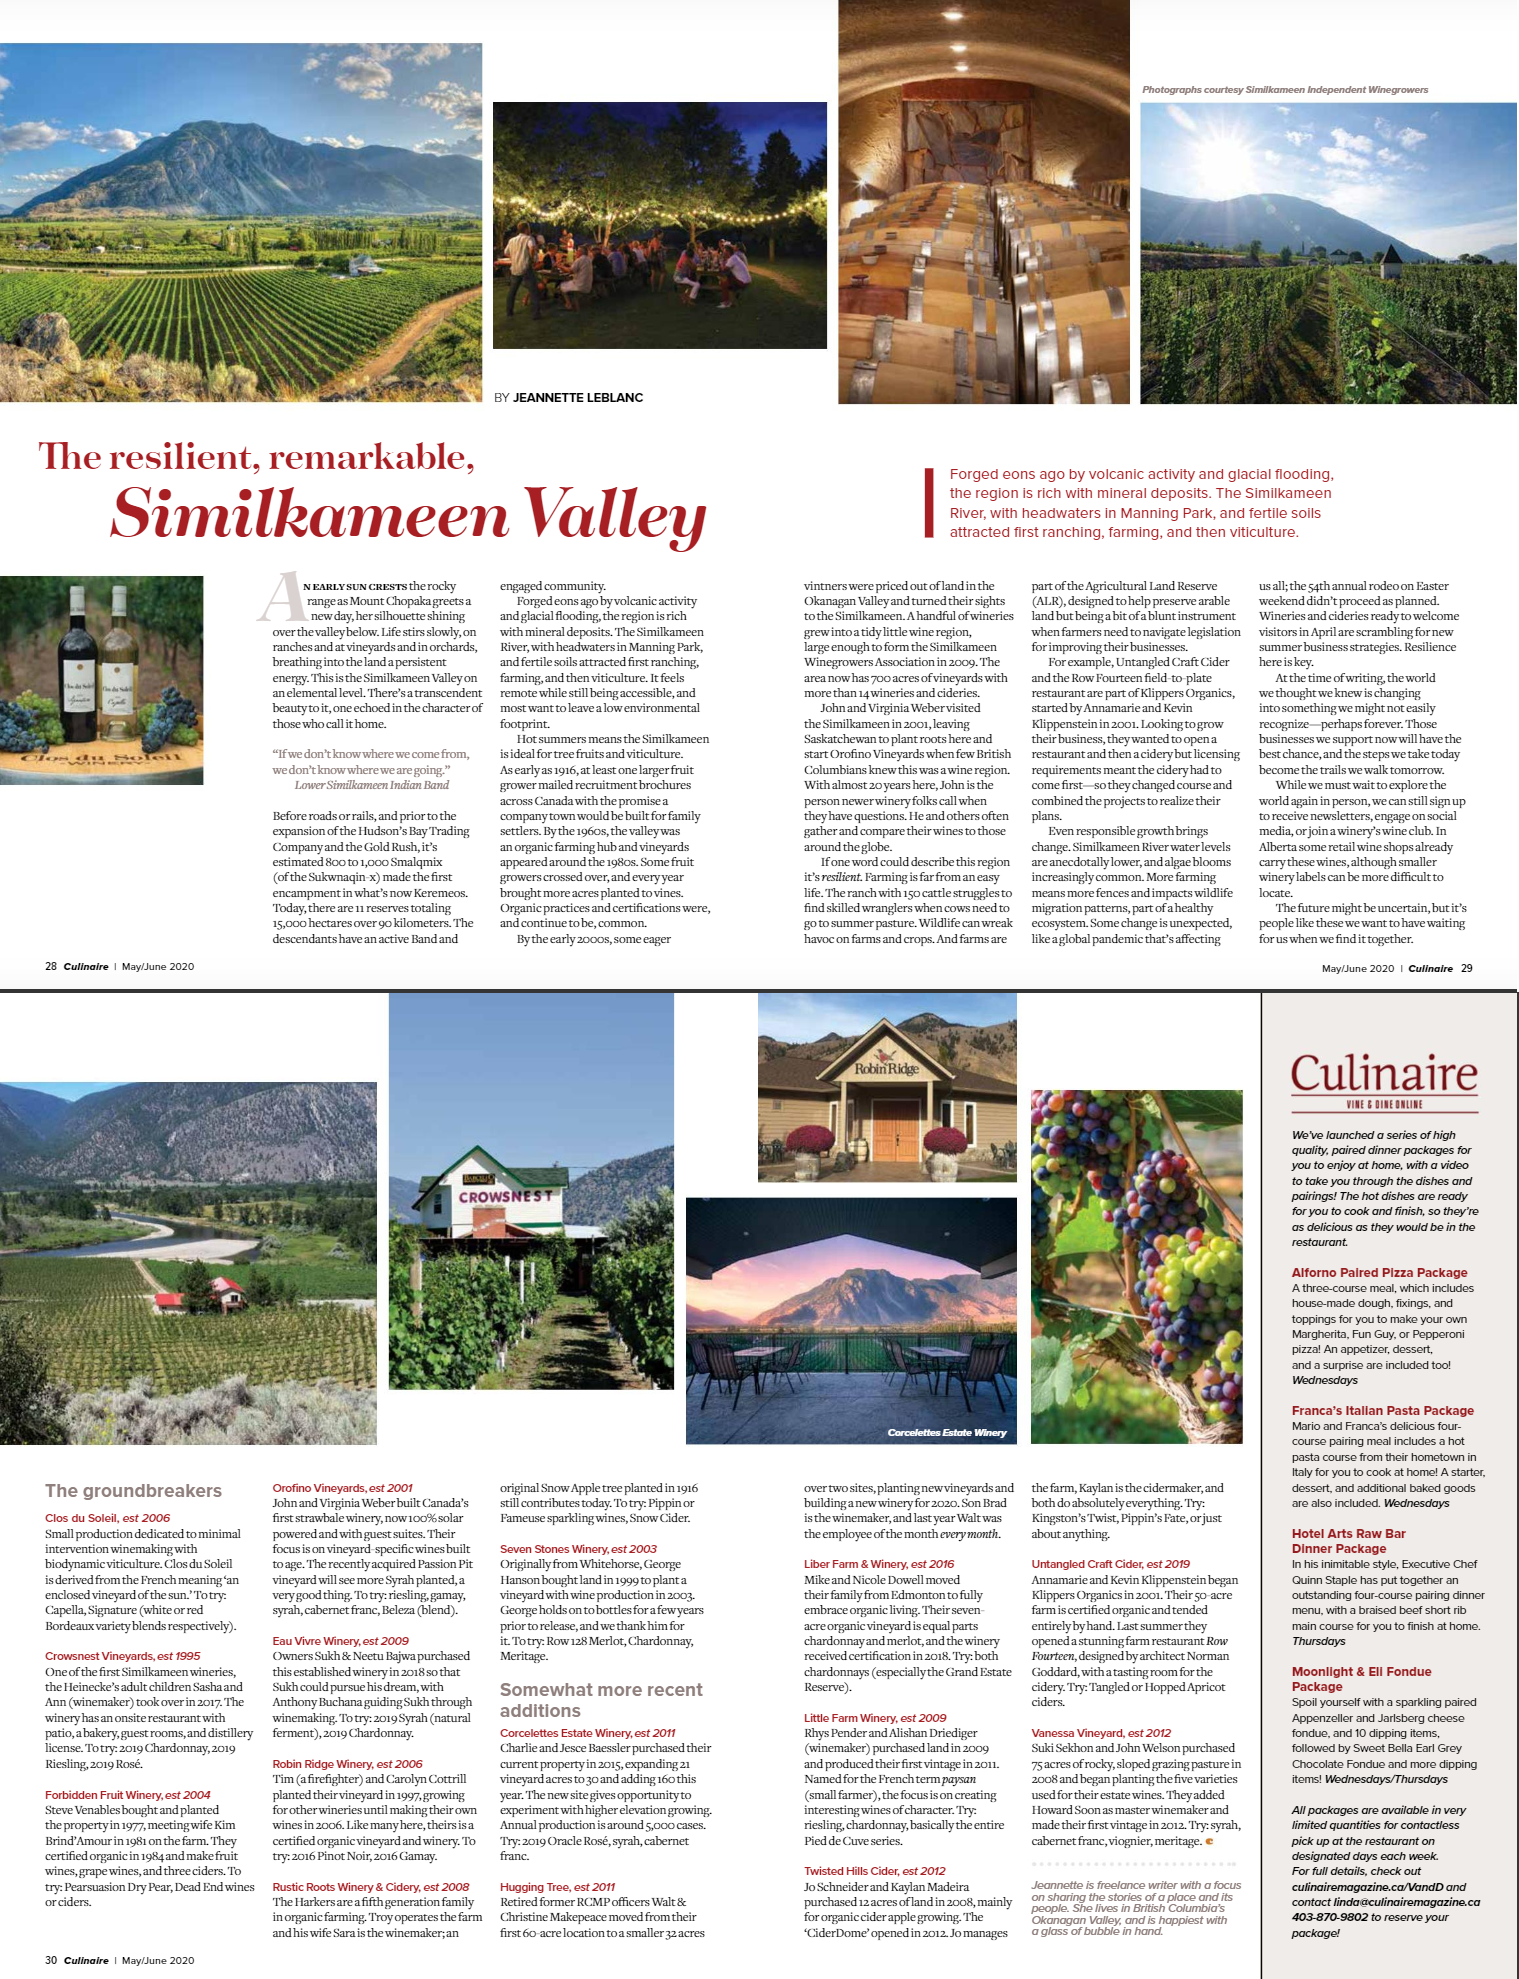 Culinaire Magazine Similkameen Valley Feature by Jeannette LeBlanc - May 2020